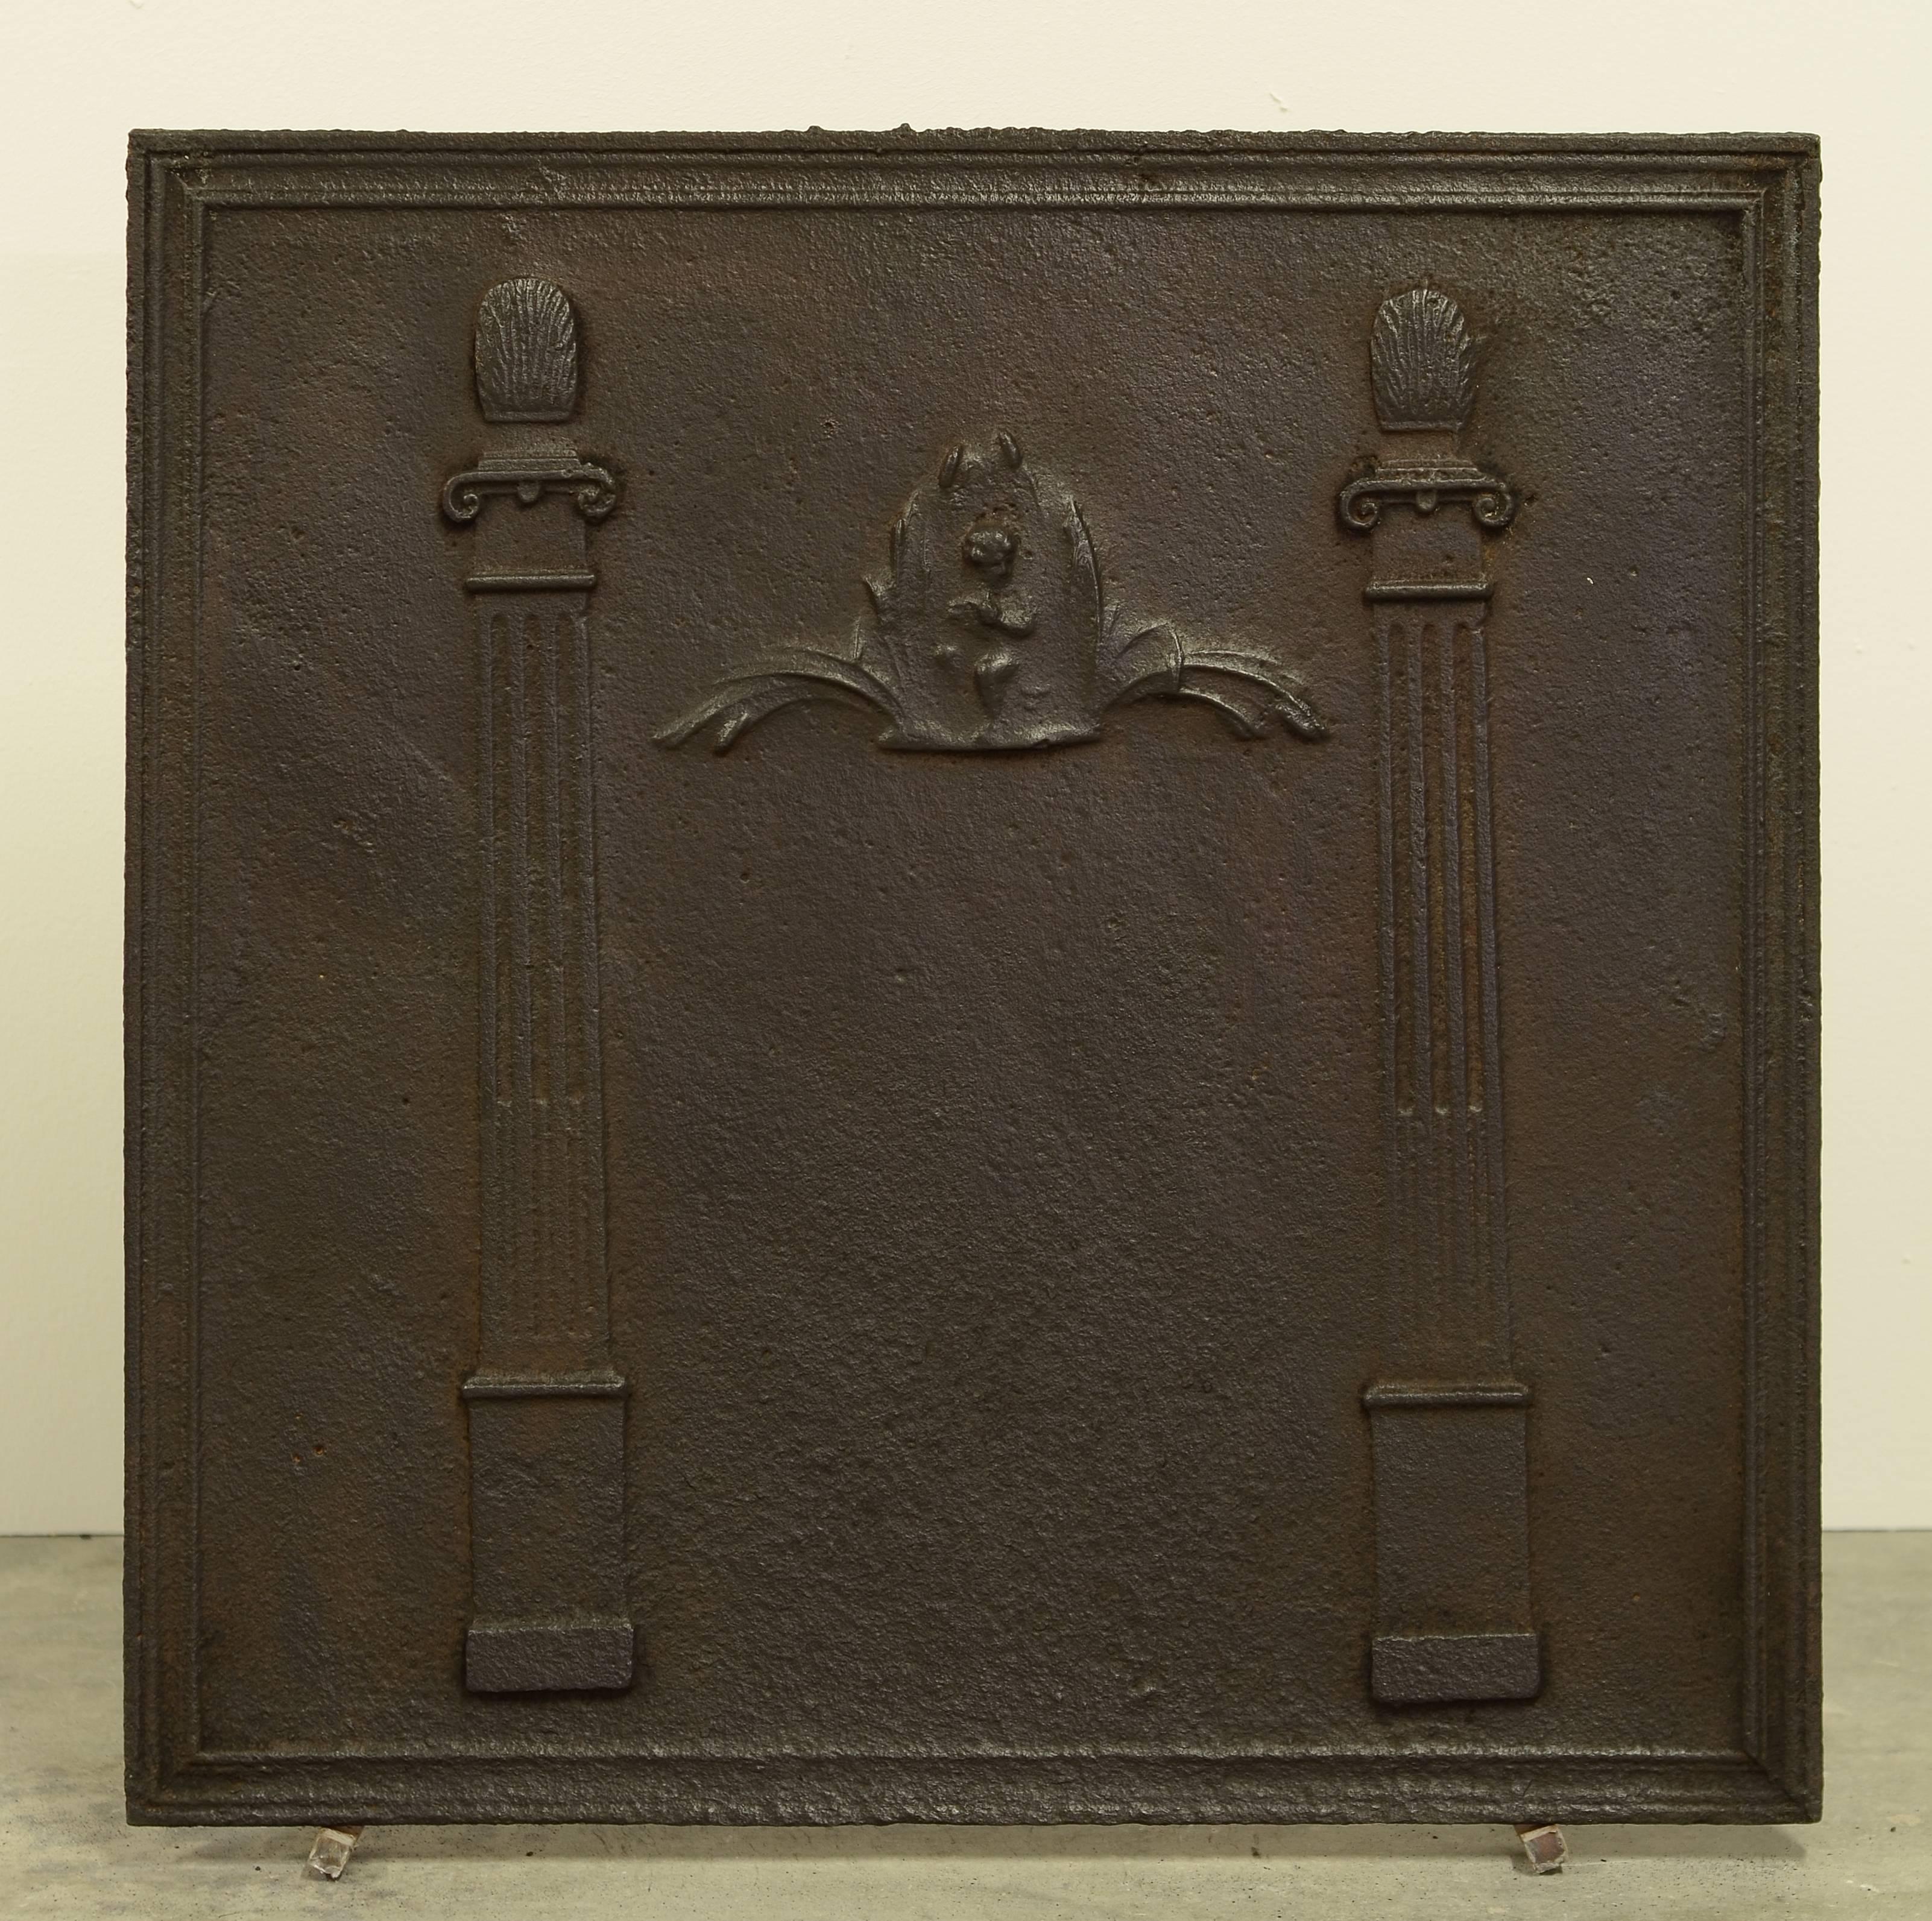 Nice square antique fireback showing to pillars with decorations in between, 19th century

Great usable dimensions.
Excellent condition, can be used in a fire or as backsplash.

Can be supplied with stand.